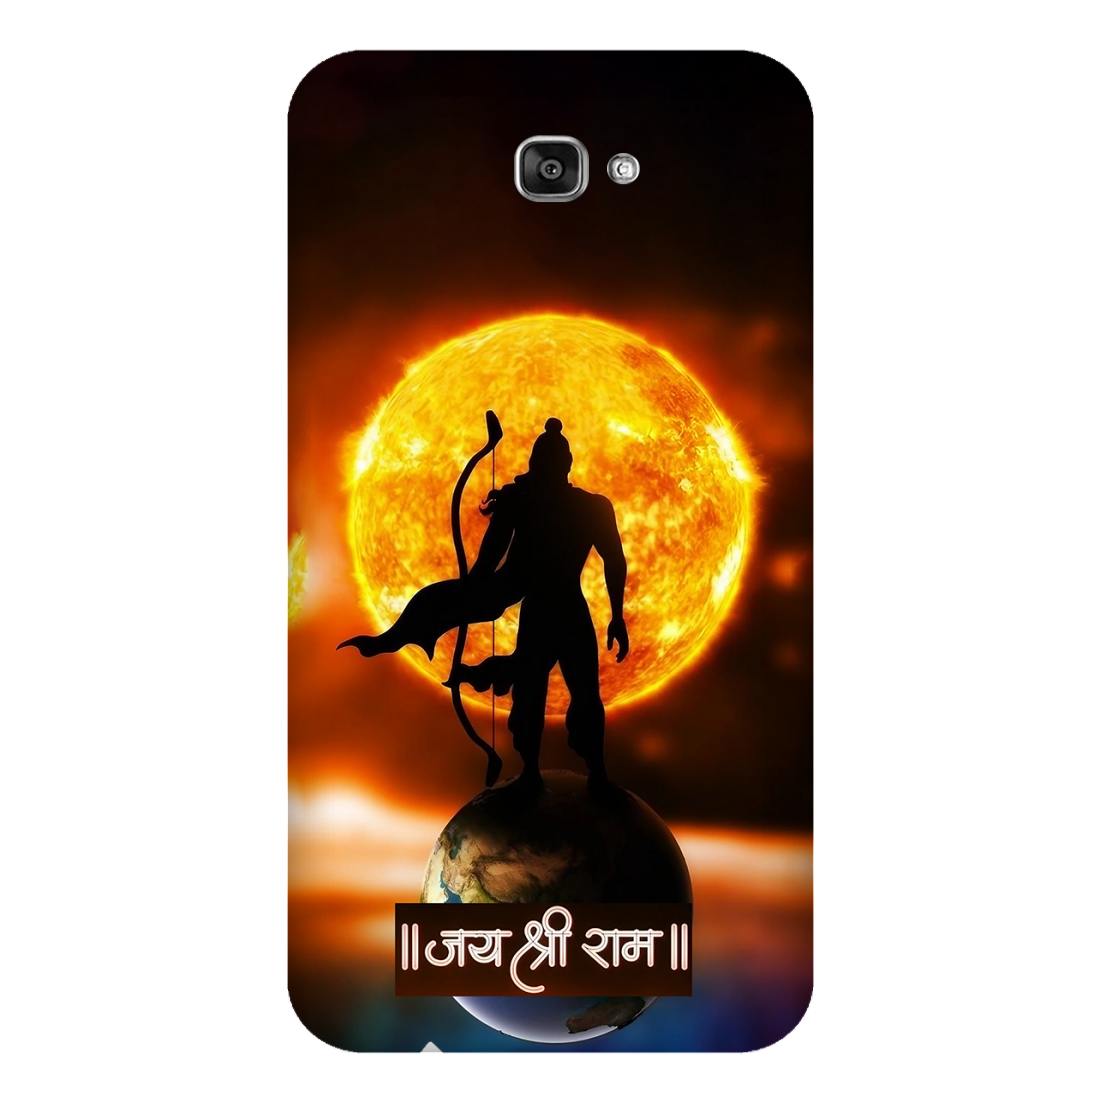 Victory to Lord Rama Case Samsung Galaxy J7 Prime